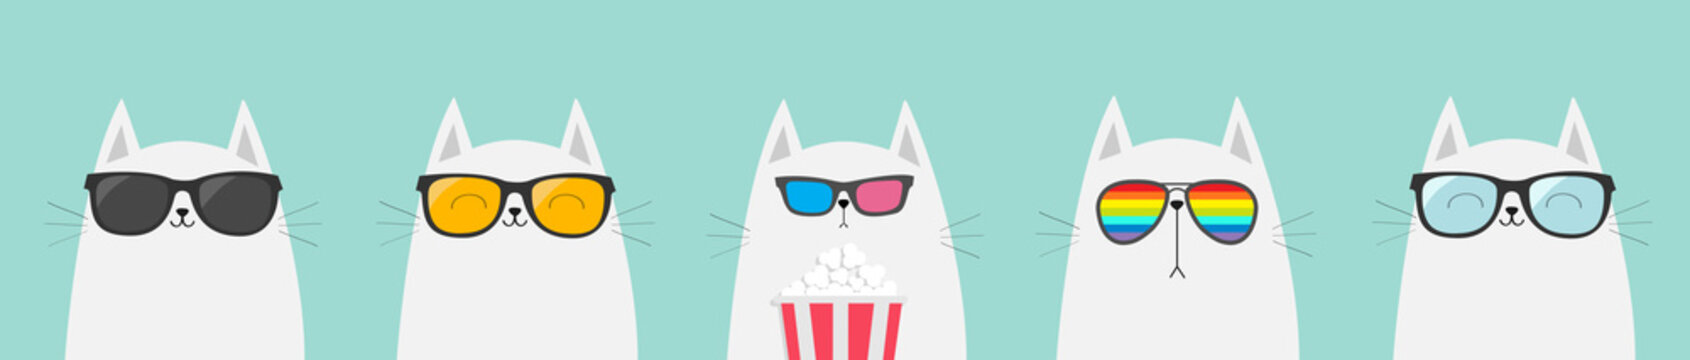 White cat set. Eating popcorn. Cinema theater. Cute cartoon funny character. Film show. Kitten watching movie in 3D glasses, sunglasses, rainbow glass. Blue background. Isolated. Flat design.